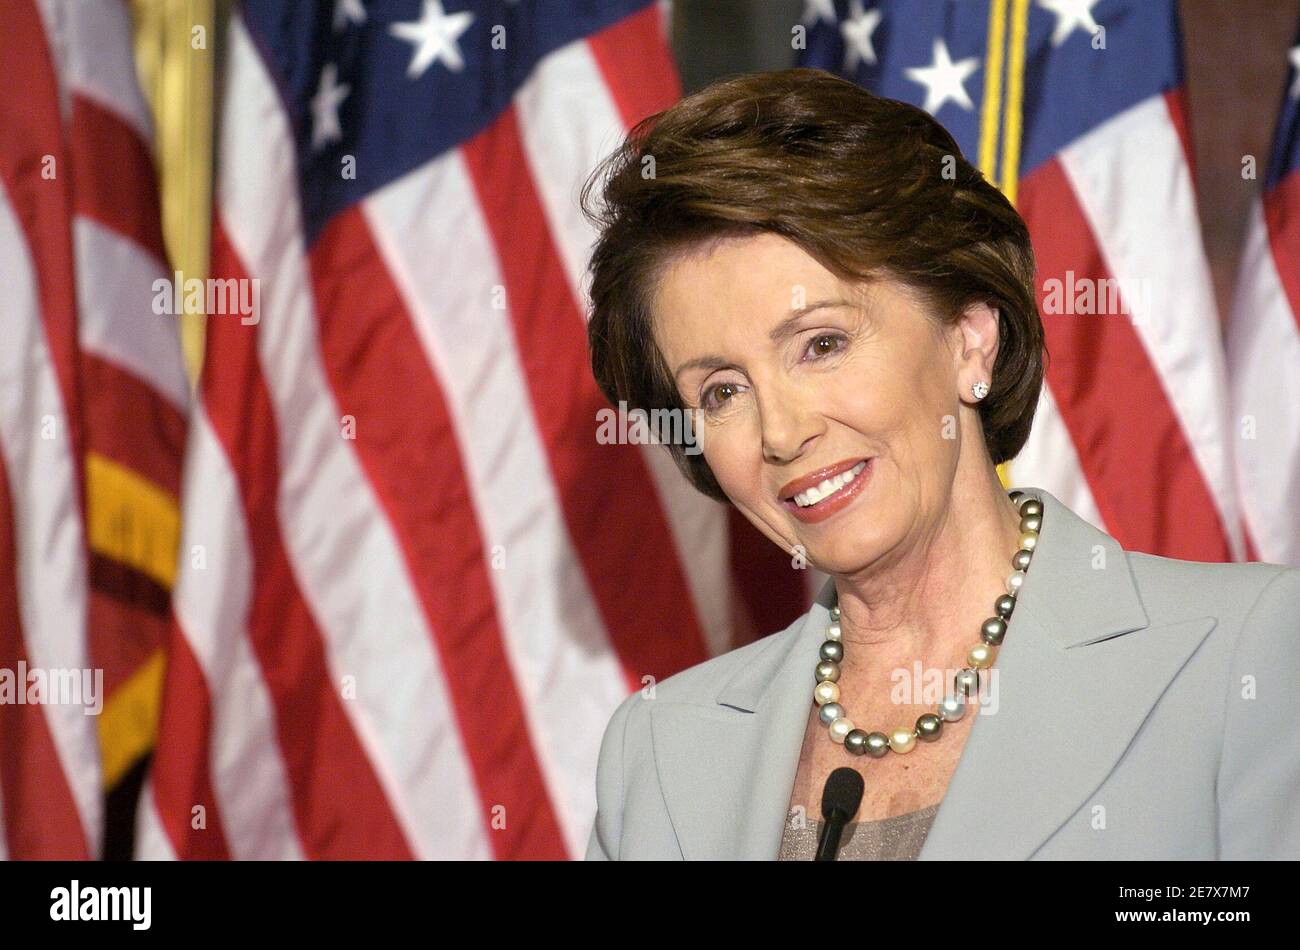 Representative Nancy Pelosi (D-CA), soon to be Speaker of the House in the aftermath of the midterm elections, speaks to the media the day after Democrats took control of the House for the first time in 12 years, on Capitol Hill November 8, 2006.        REUTERS/Mike Theiler  (UNITED STATES) Stock Photo